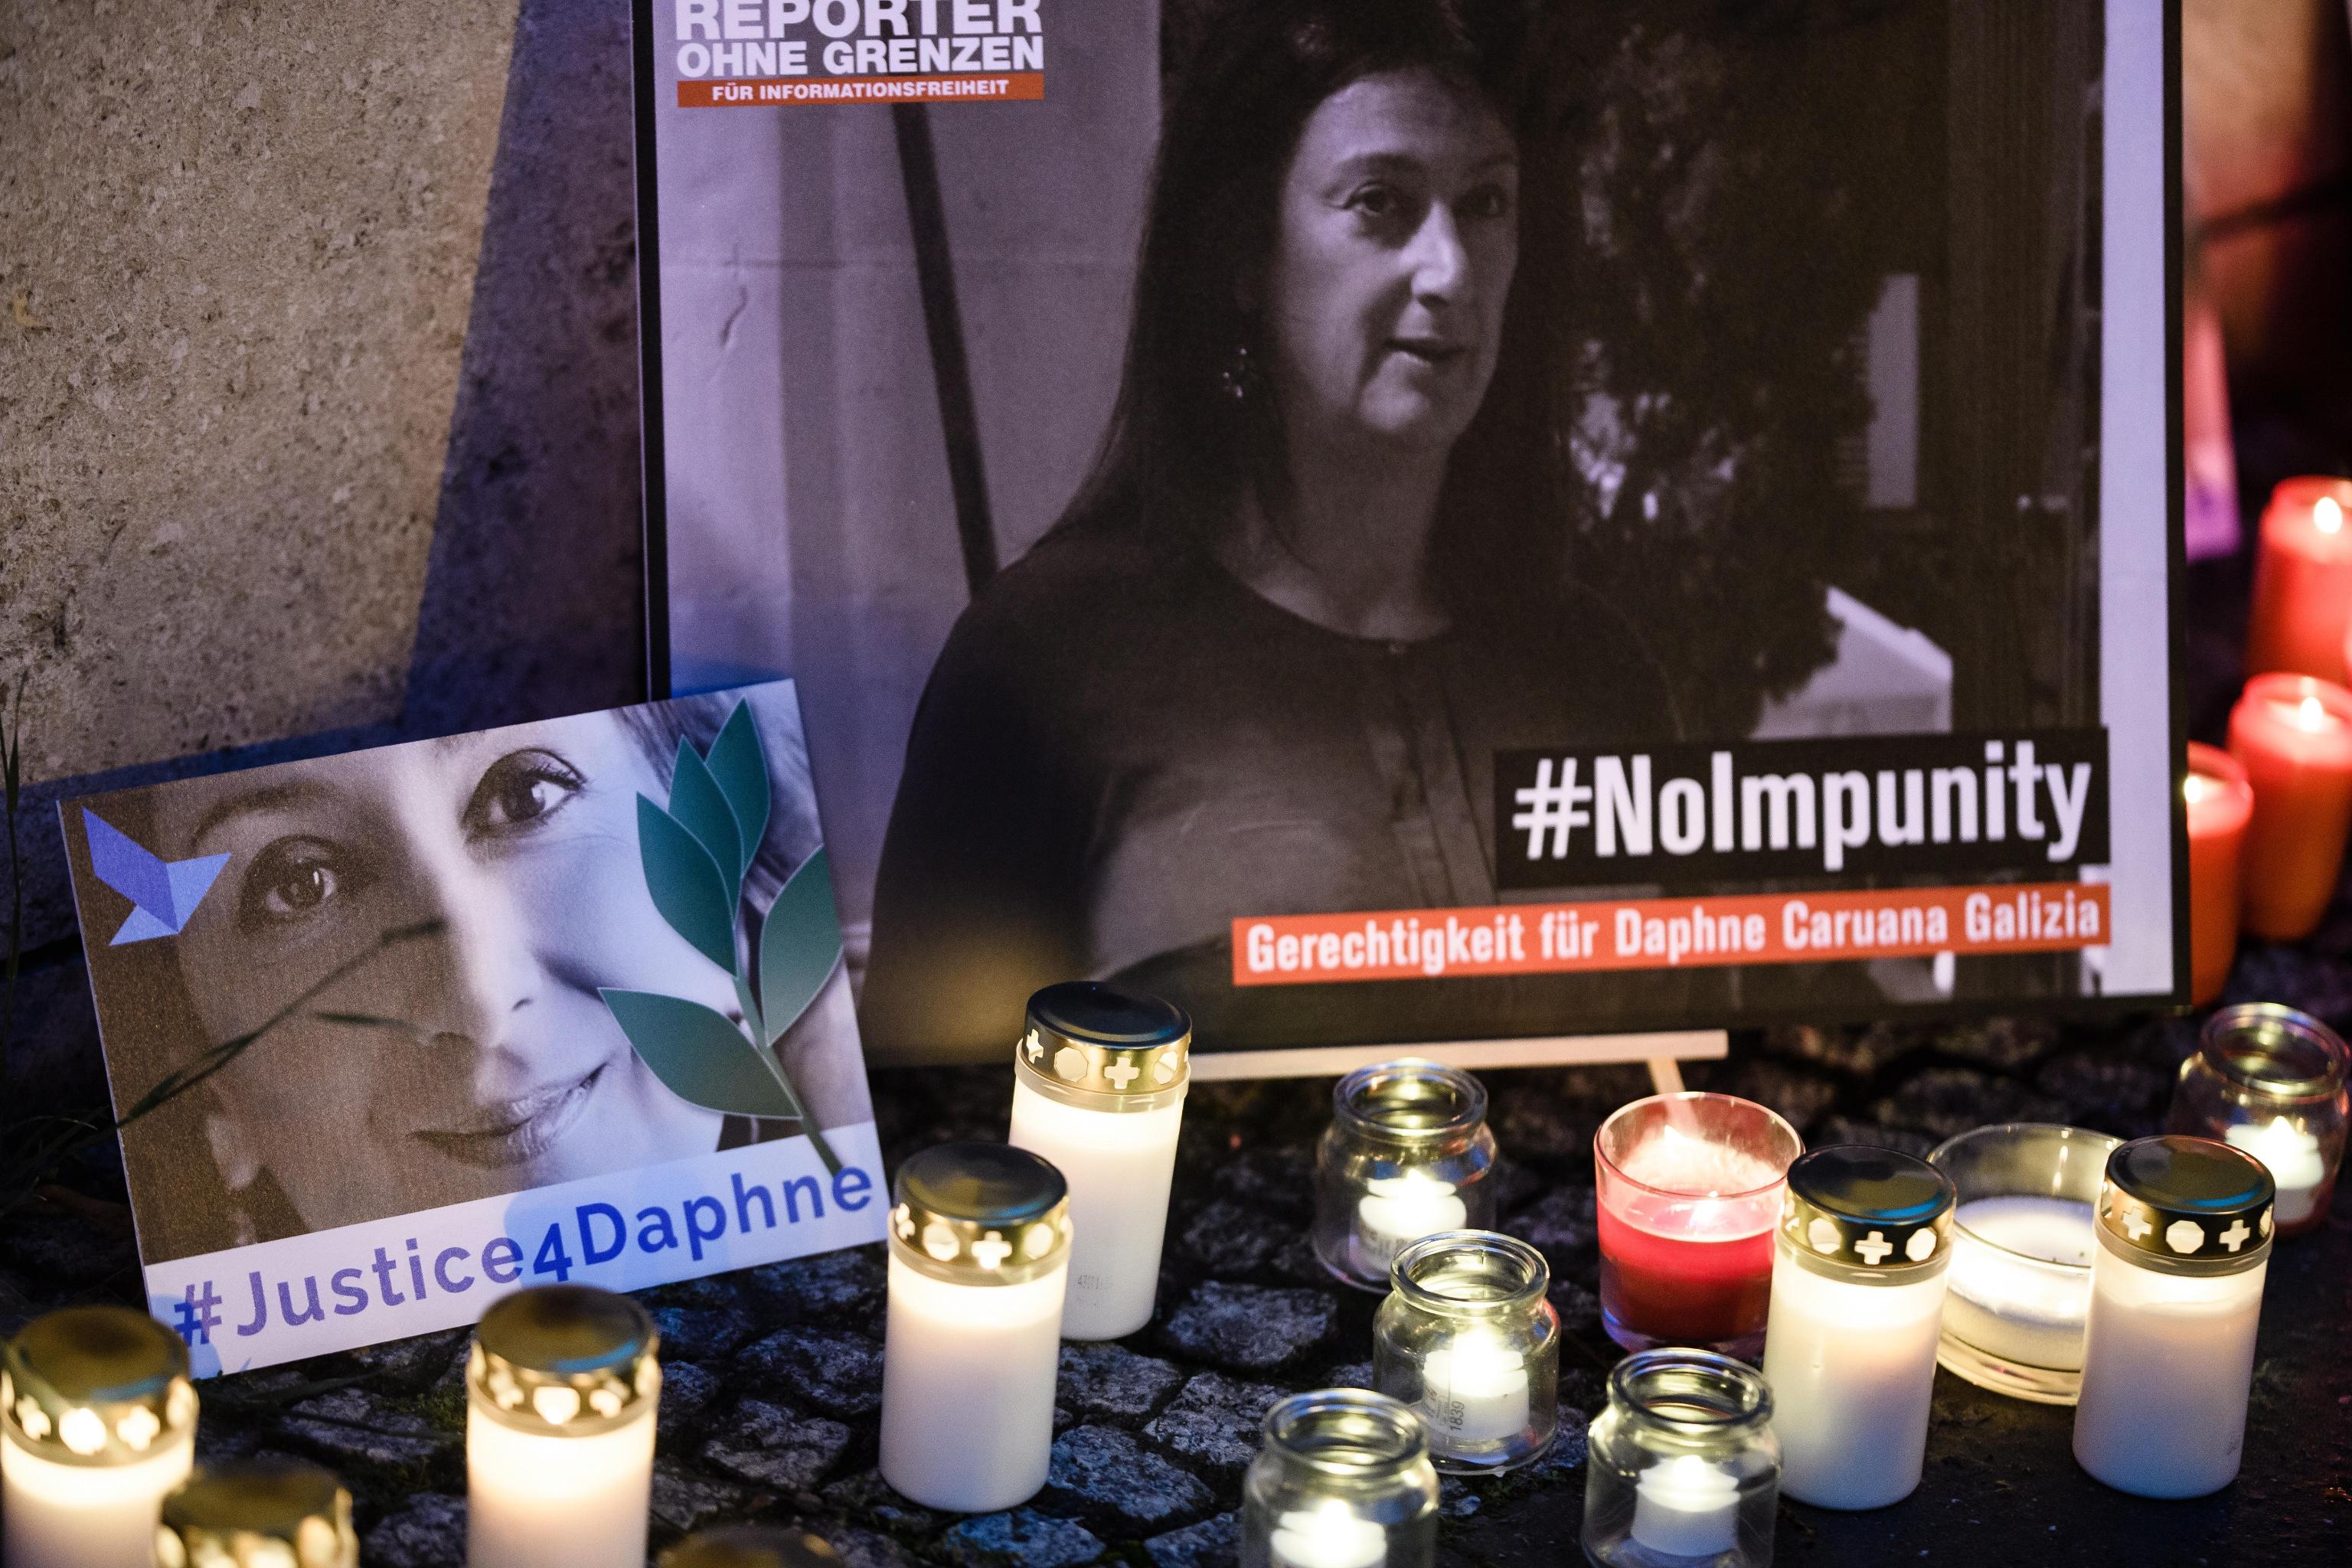 epa07925851 'Justice four Daphne' is written on a cardboard showing a photo of Daphne Caruana Galizia, during a picket in front of the Maltese embassy for murdered journalist Daphne Caruana Galizia in Berlin, Germany, 16 October 2019. Reporters Without Borders organized a picket for murdered journalist Daphne Caruana Galizia, who was killed on 16 October 2017 in Malta, while investigating the Panama Papers case.  EPA/CLEMENS BILAN